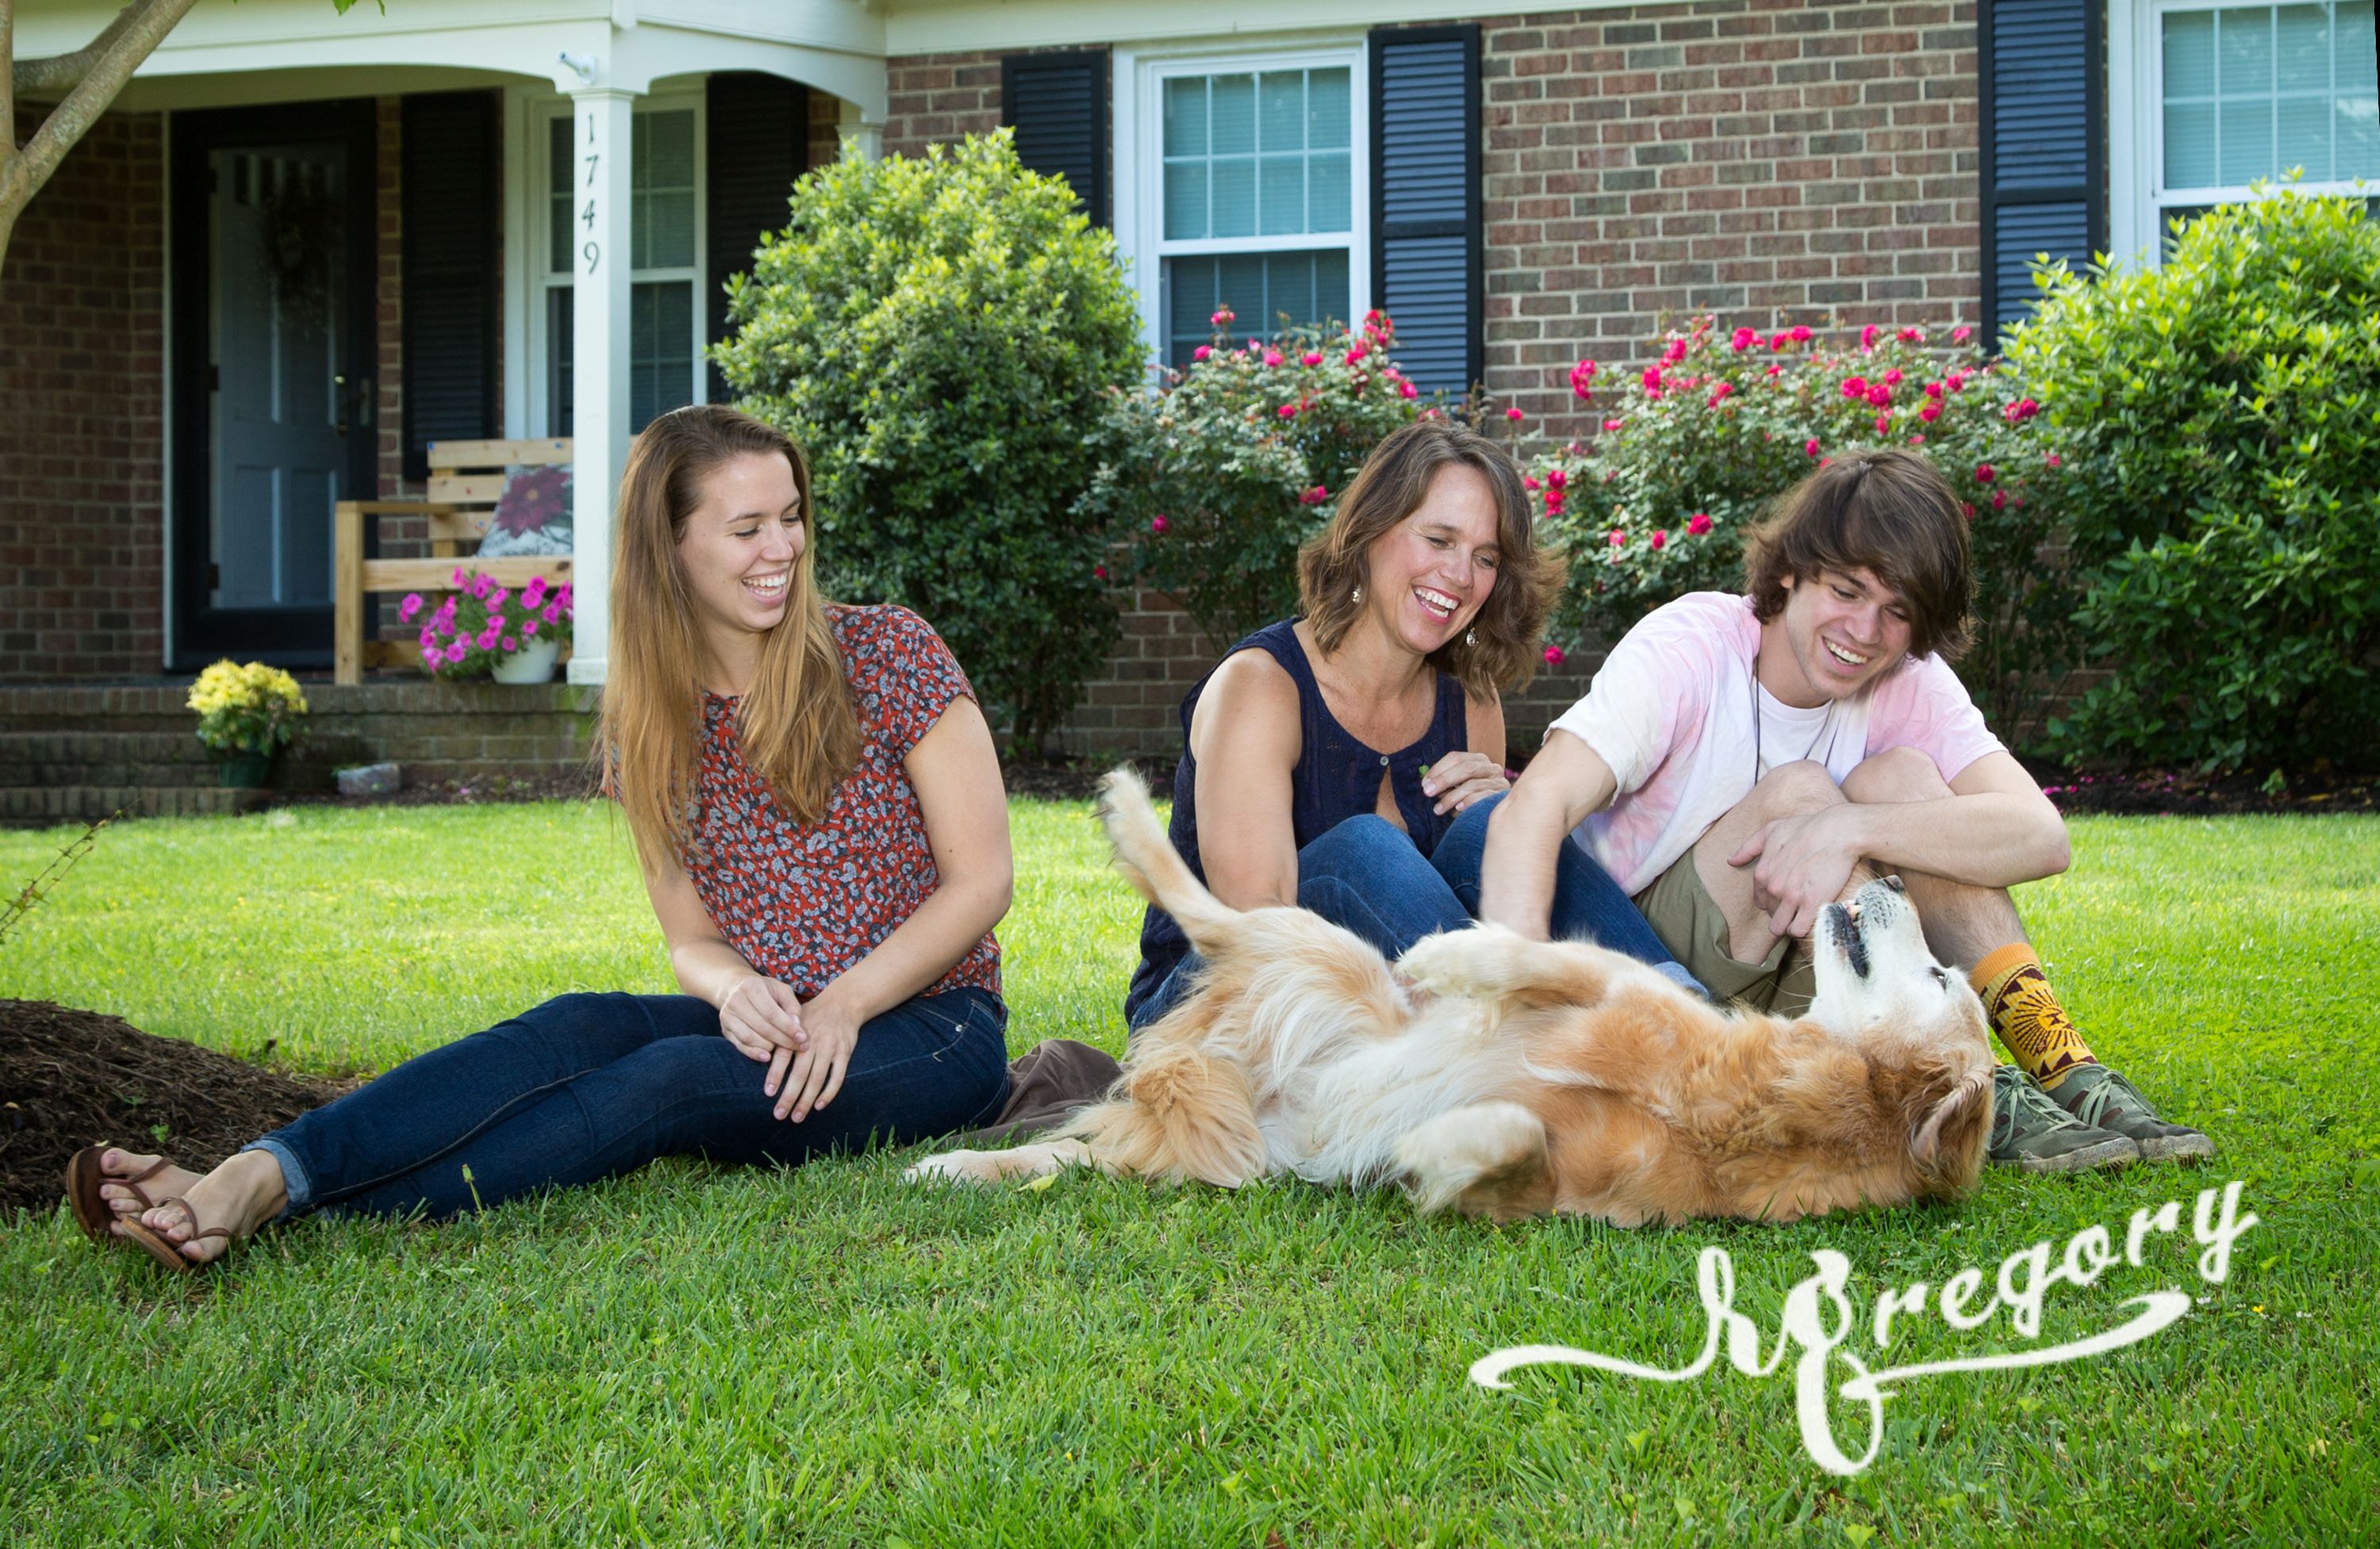 Parcells candid family shot on front lawn with pet dog